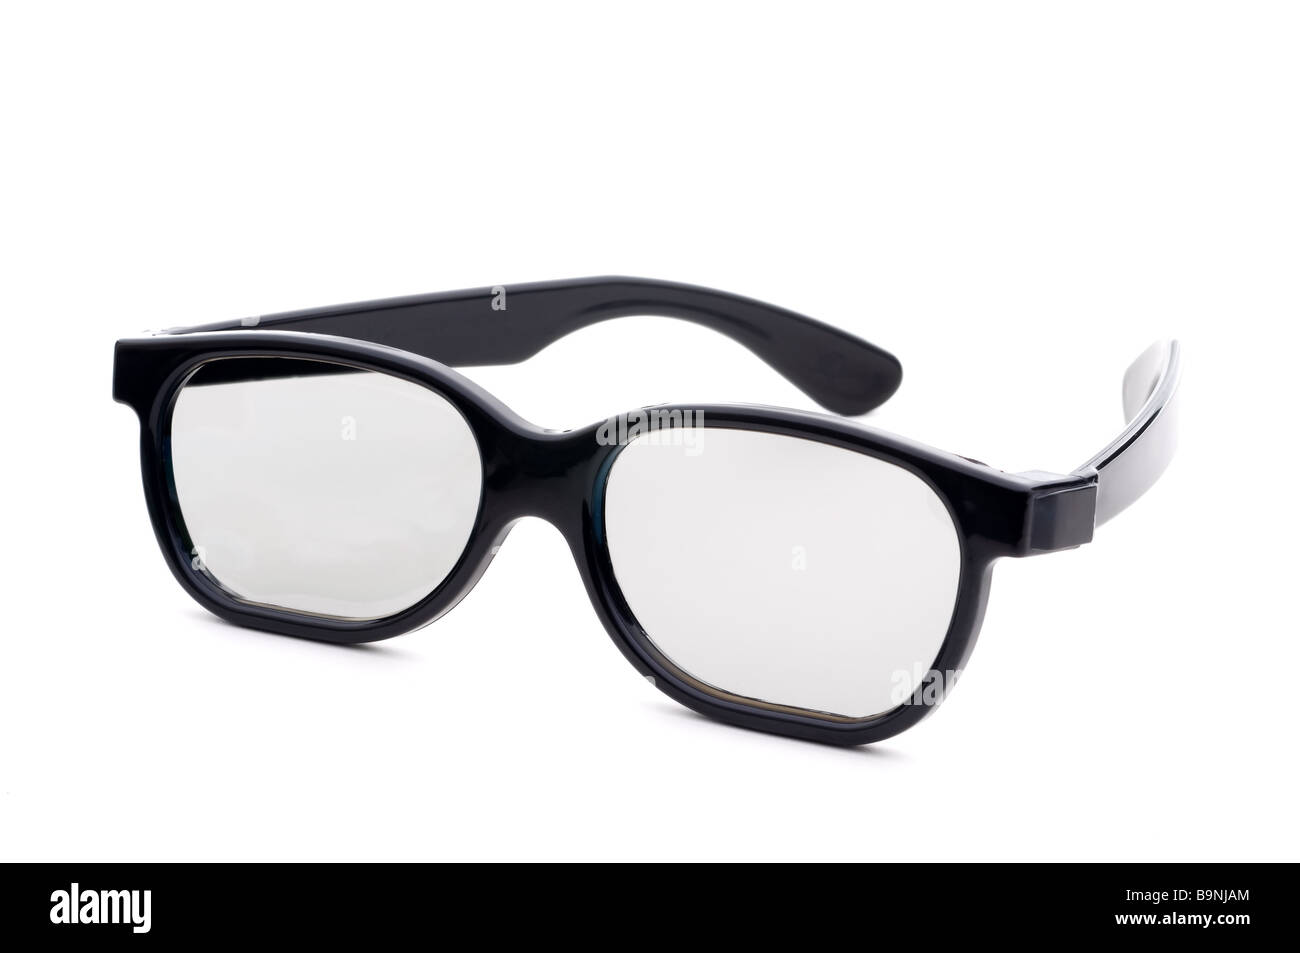 Black eye glasses with tinted lenses on a white background Stock Photo